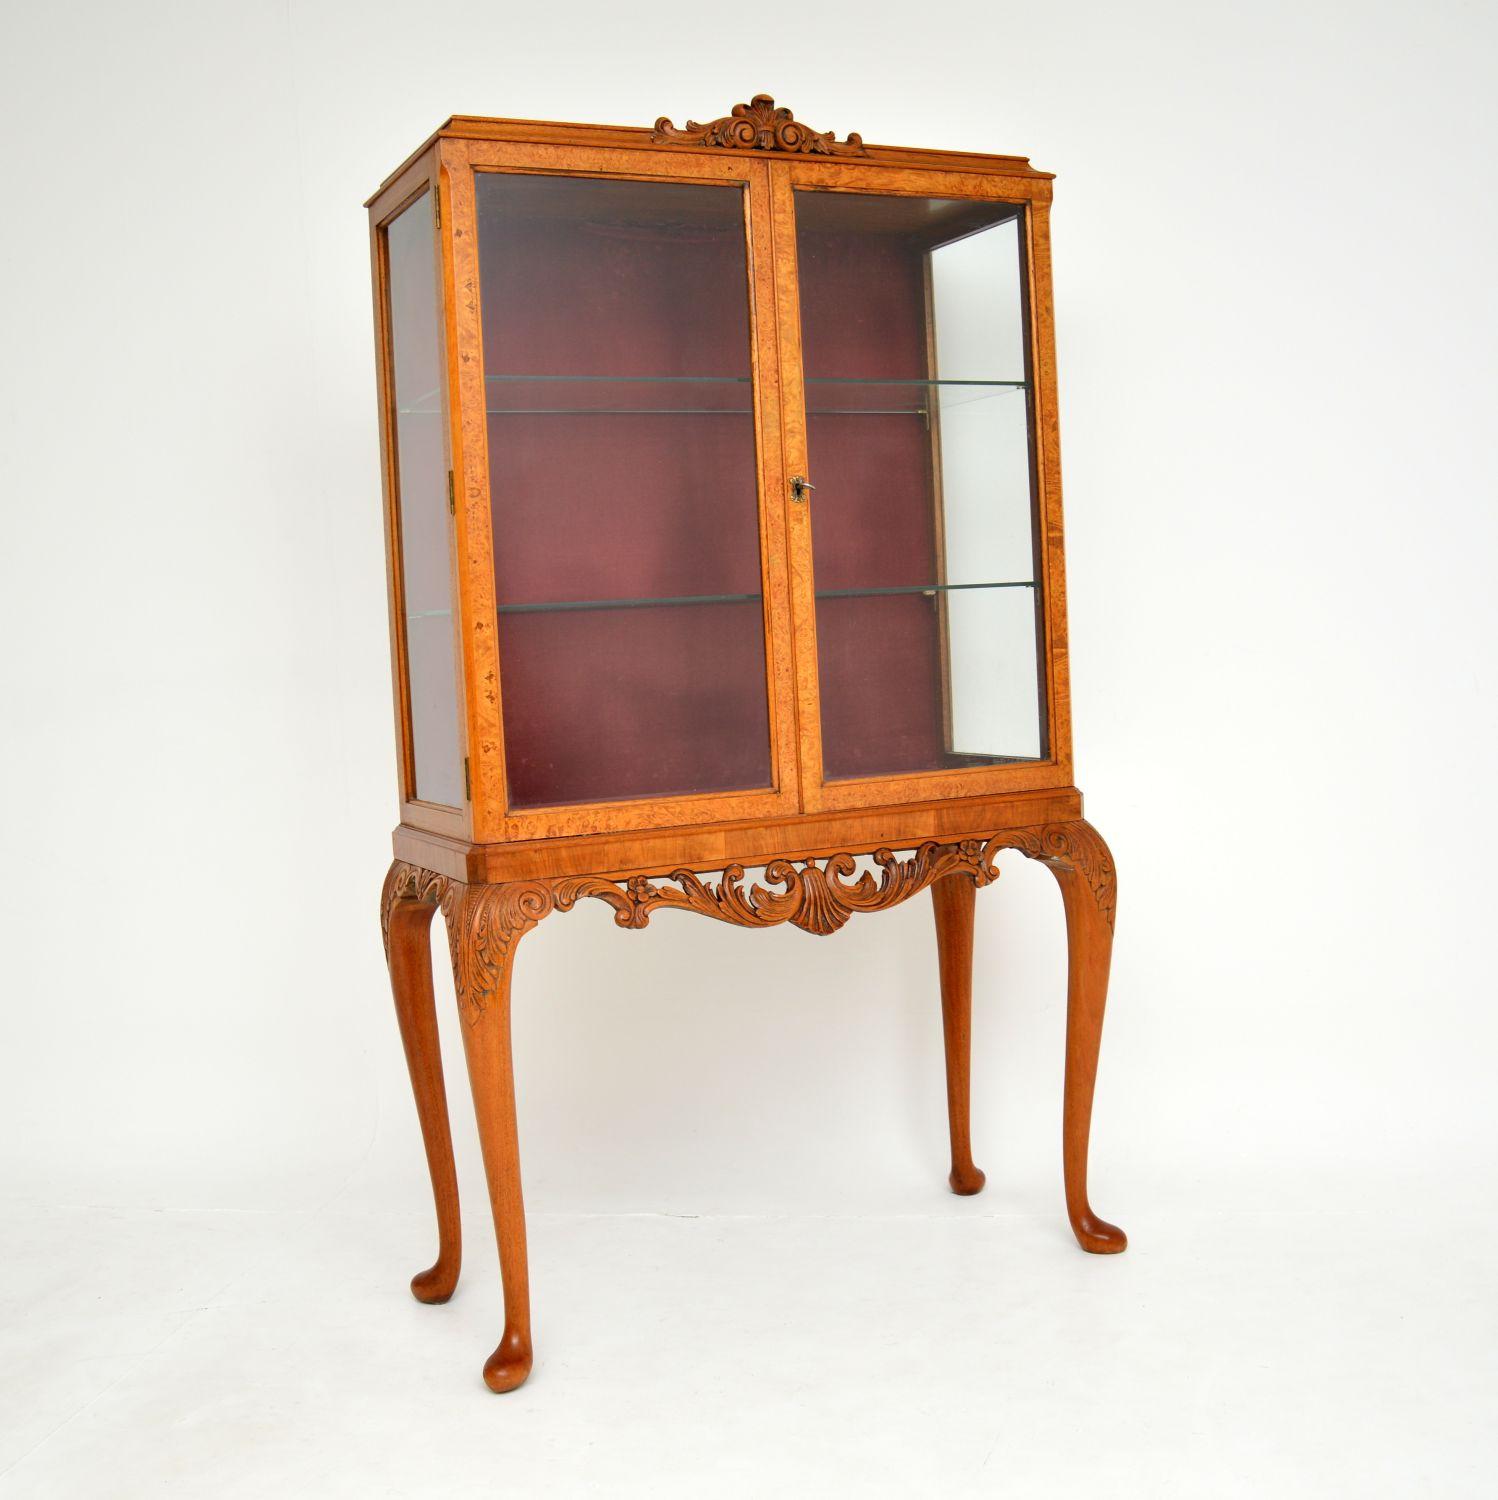 A beautiful burr walnut and glass display cabinet in the antique Queen Anne style. This was made in England, it dates from around the 1930’s.

It is a lovely size and is very well made. The burr walnut has a gorgeous light colour tone, and there